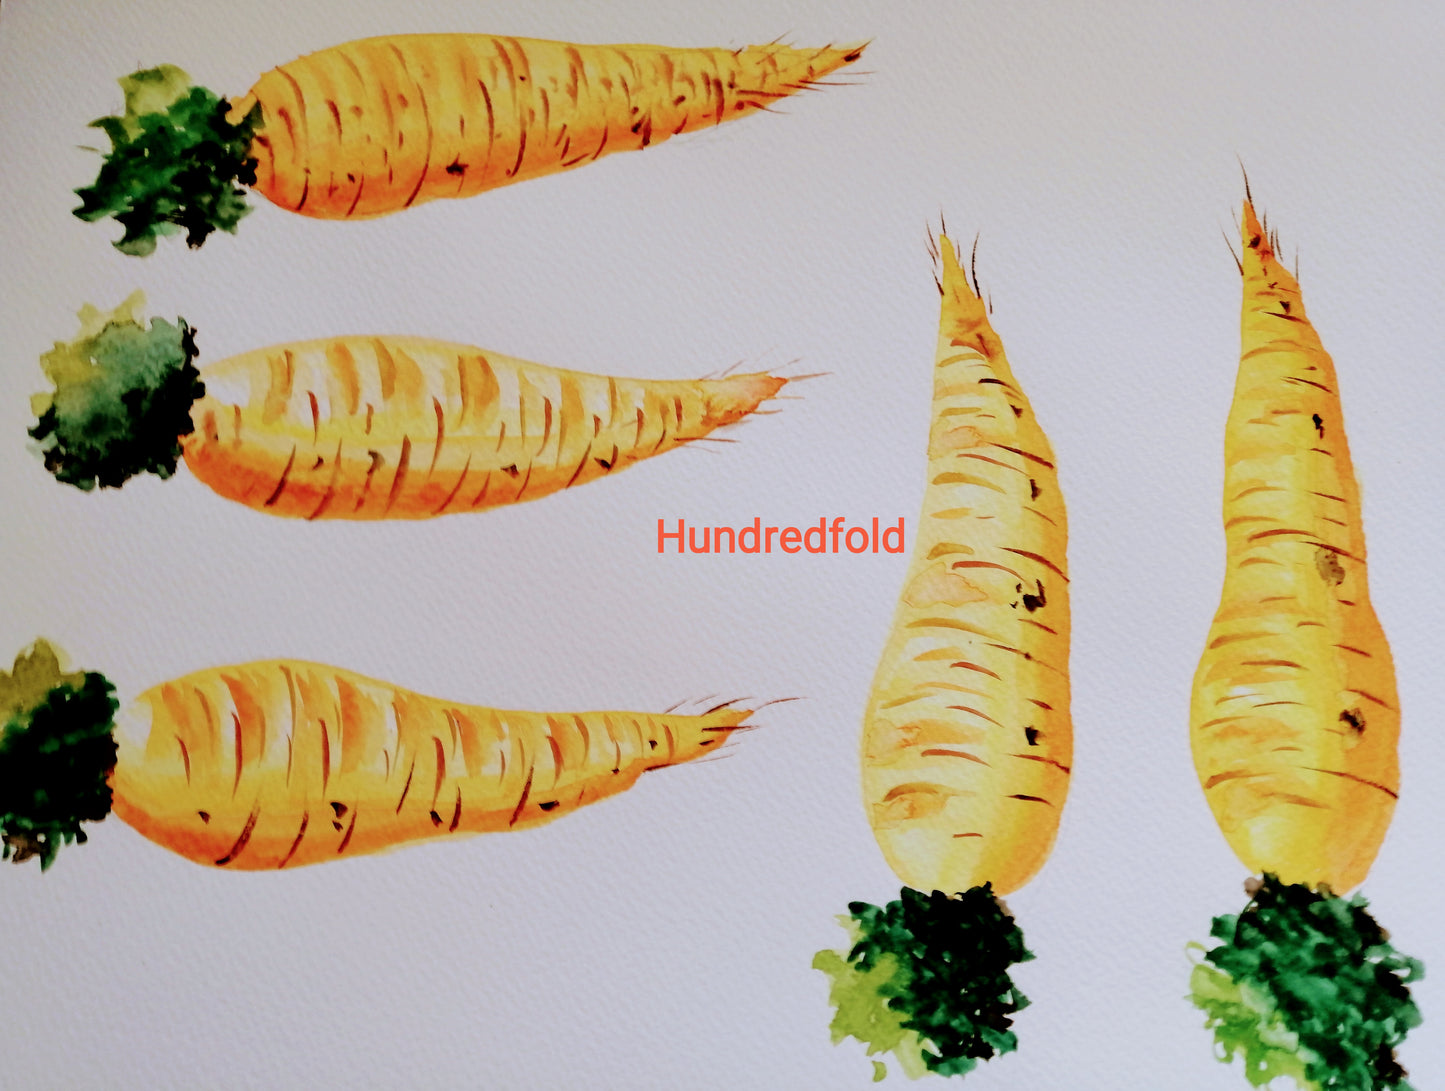 Hundredfold Chantenay Carrot 1000 Vegetable Seeds - Non-GMO Classic Carrot, Red Cored Sweet Heirloom Variety, Attract Swallowtail Butterflies, Packed & Shipped in Canada